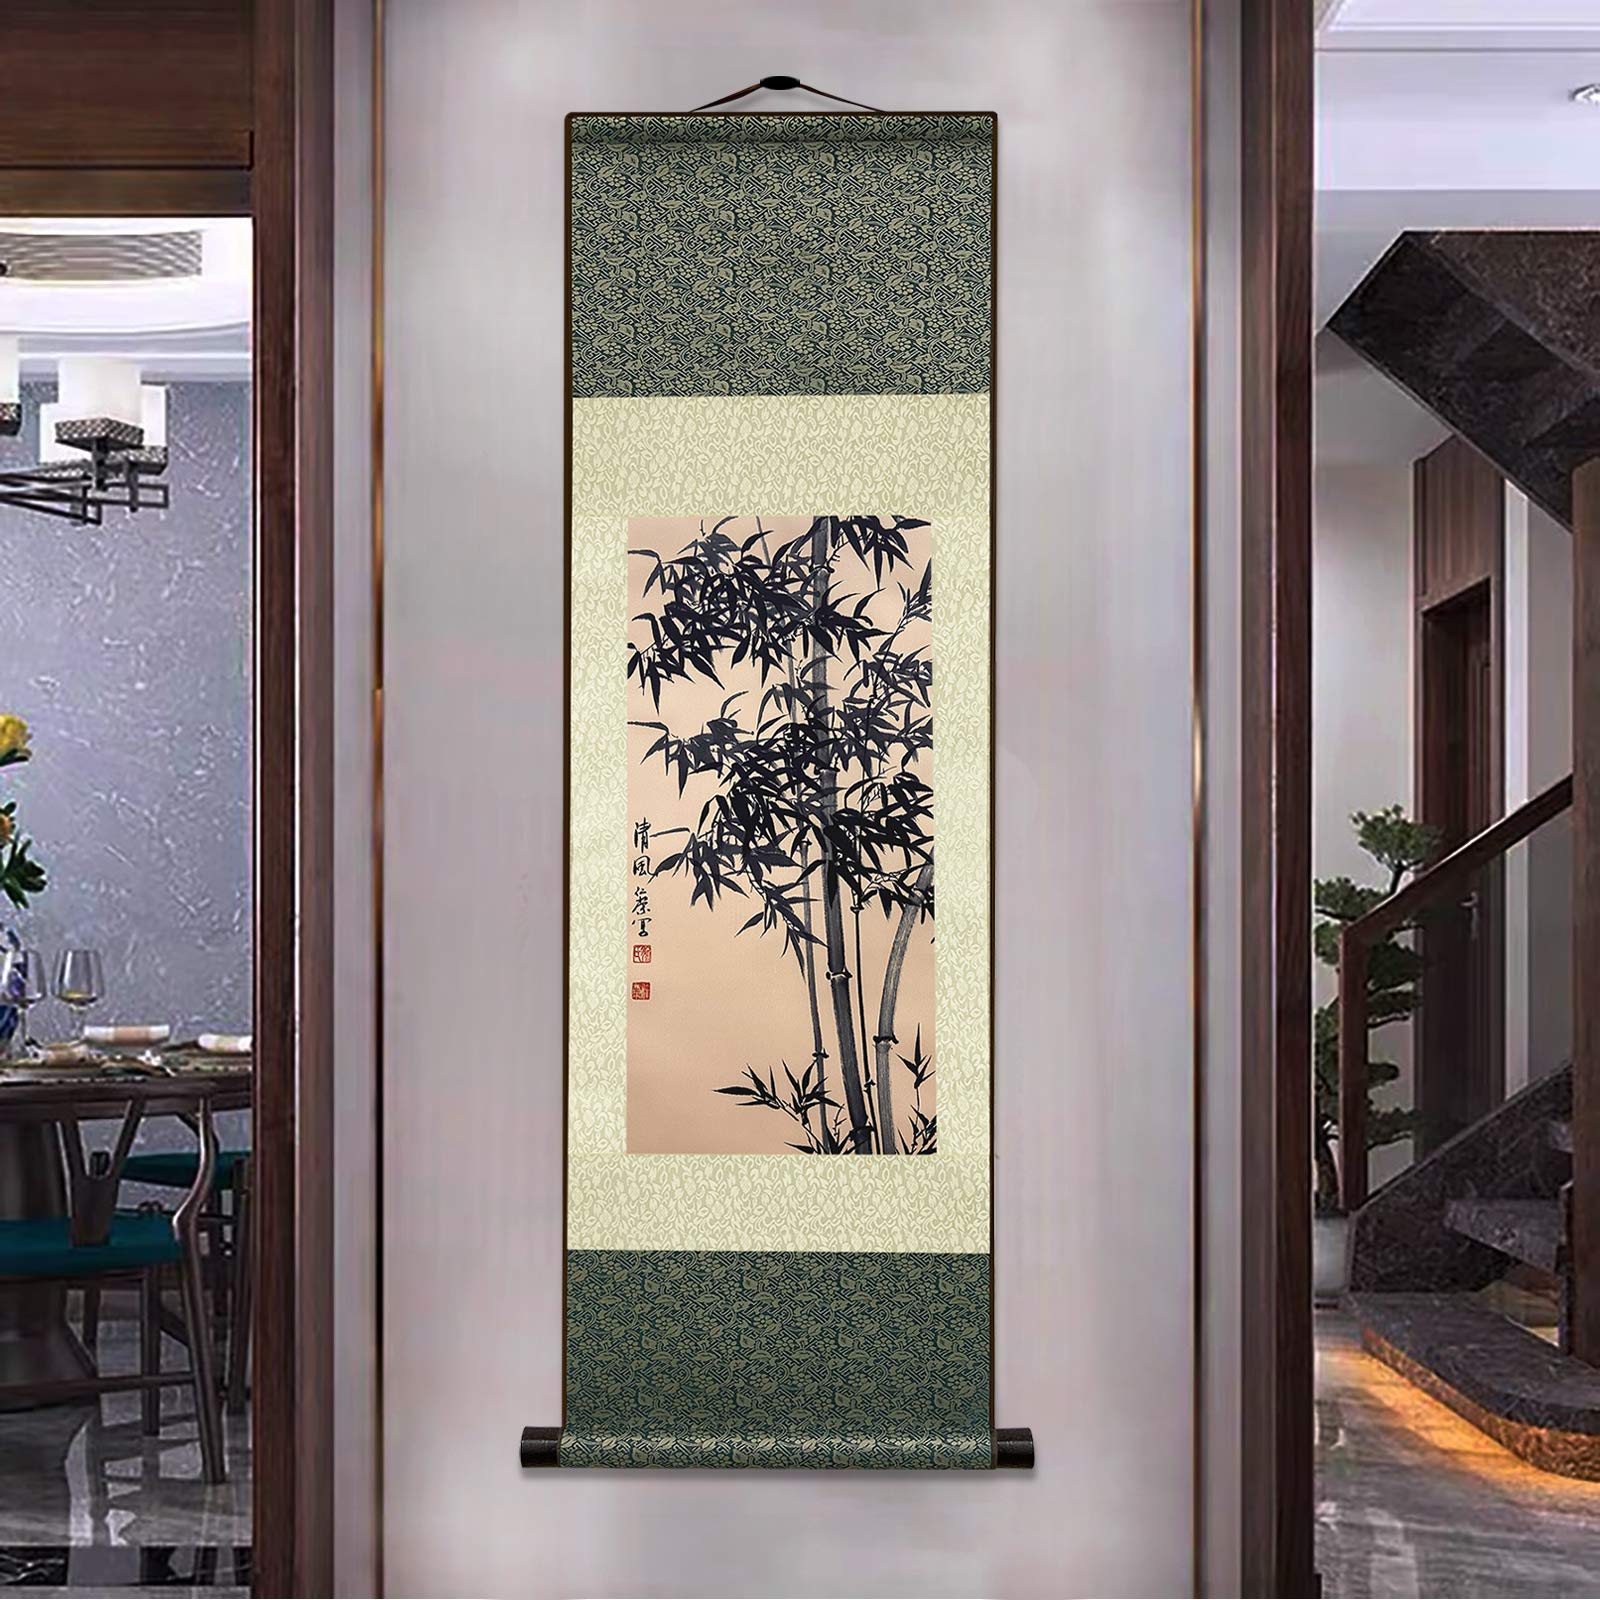 AtfArt Asian Wall Decor Beautiful Silk Scroll Painting Bamboo Leaf Plant - Ancient Bamboo Oriental Decor Chinese Art Wall Scroll Wall Hanging Painting Scroll (39 x 12 in)